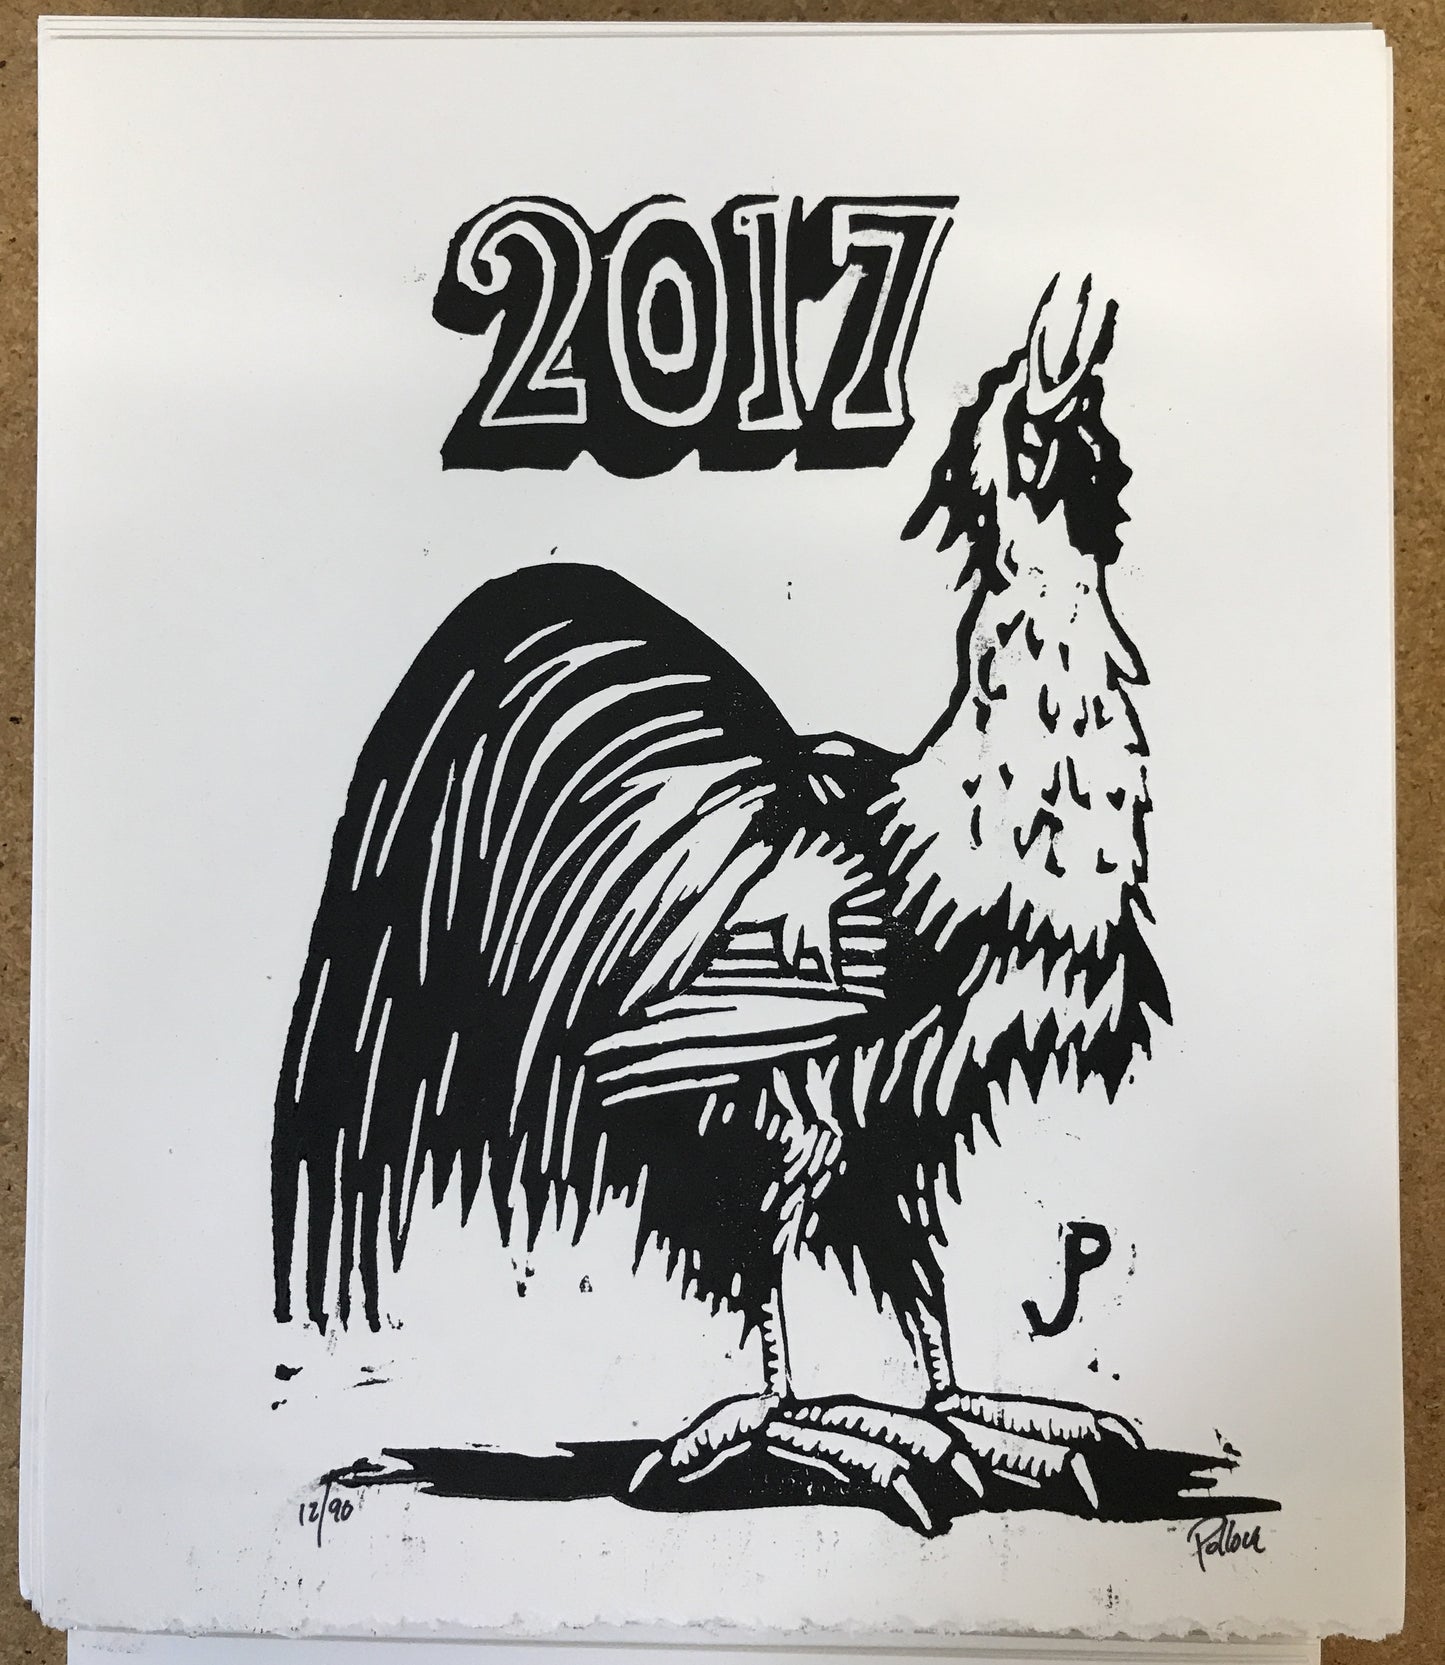 Jim Pollock "Year of the Rooster"